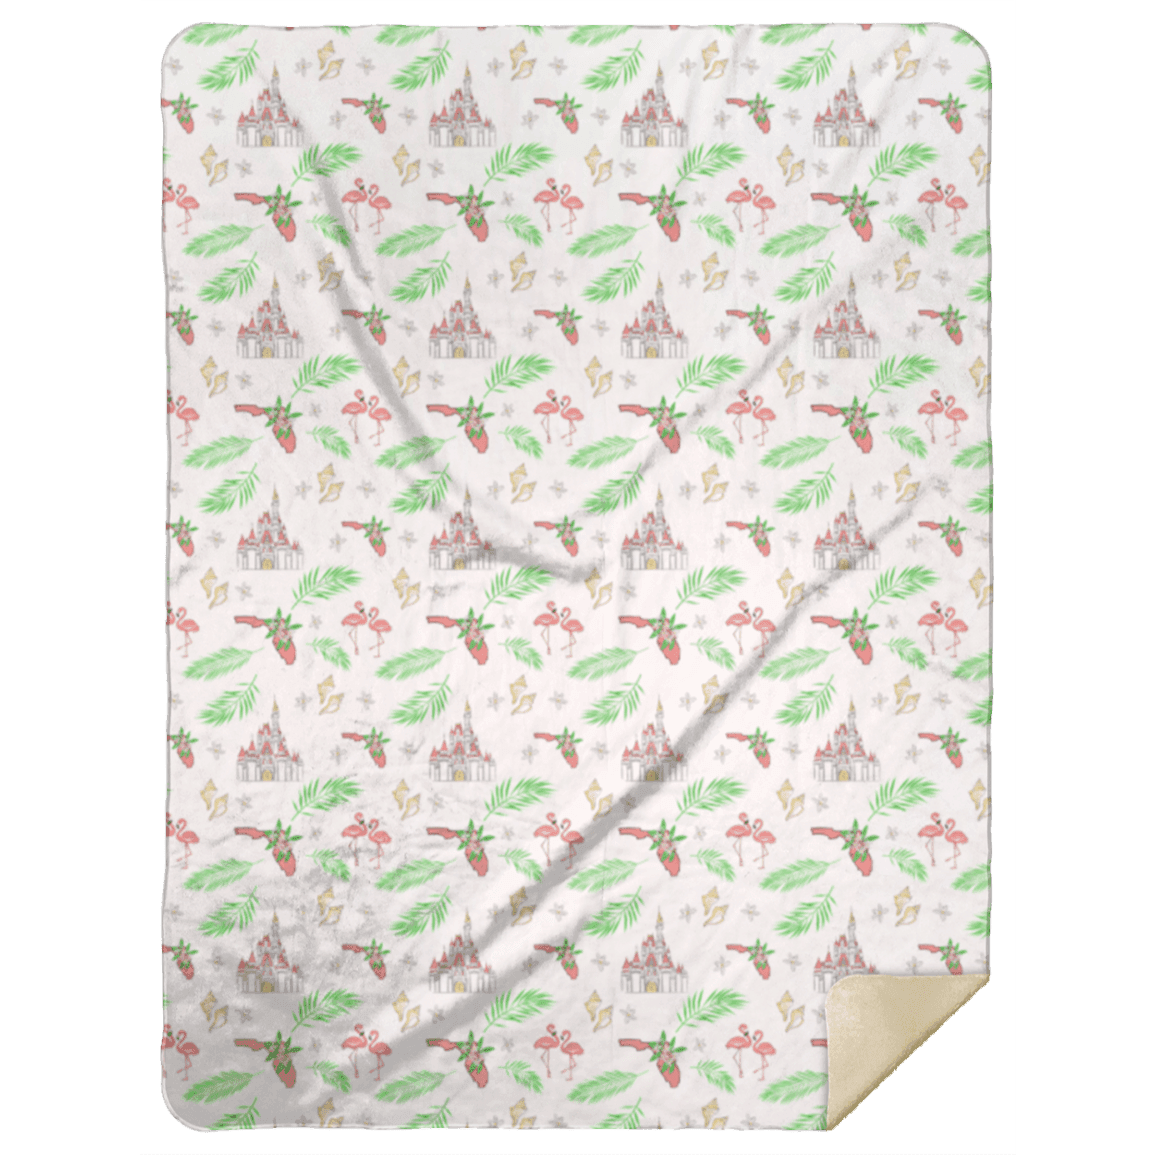 Soft pink plush throw blanket with Florida state map, featuring palm trees, flamingos, the Castle, and oranges.